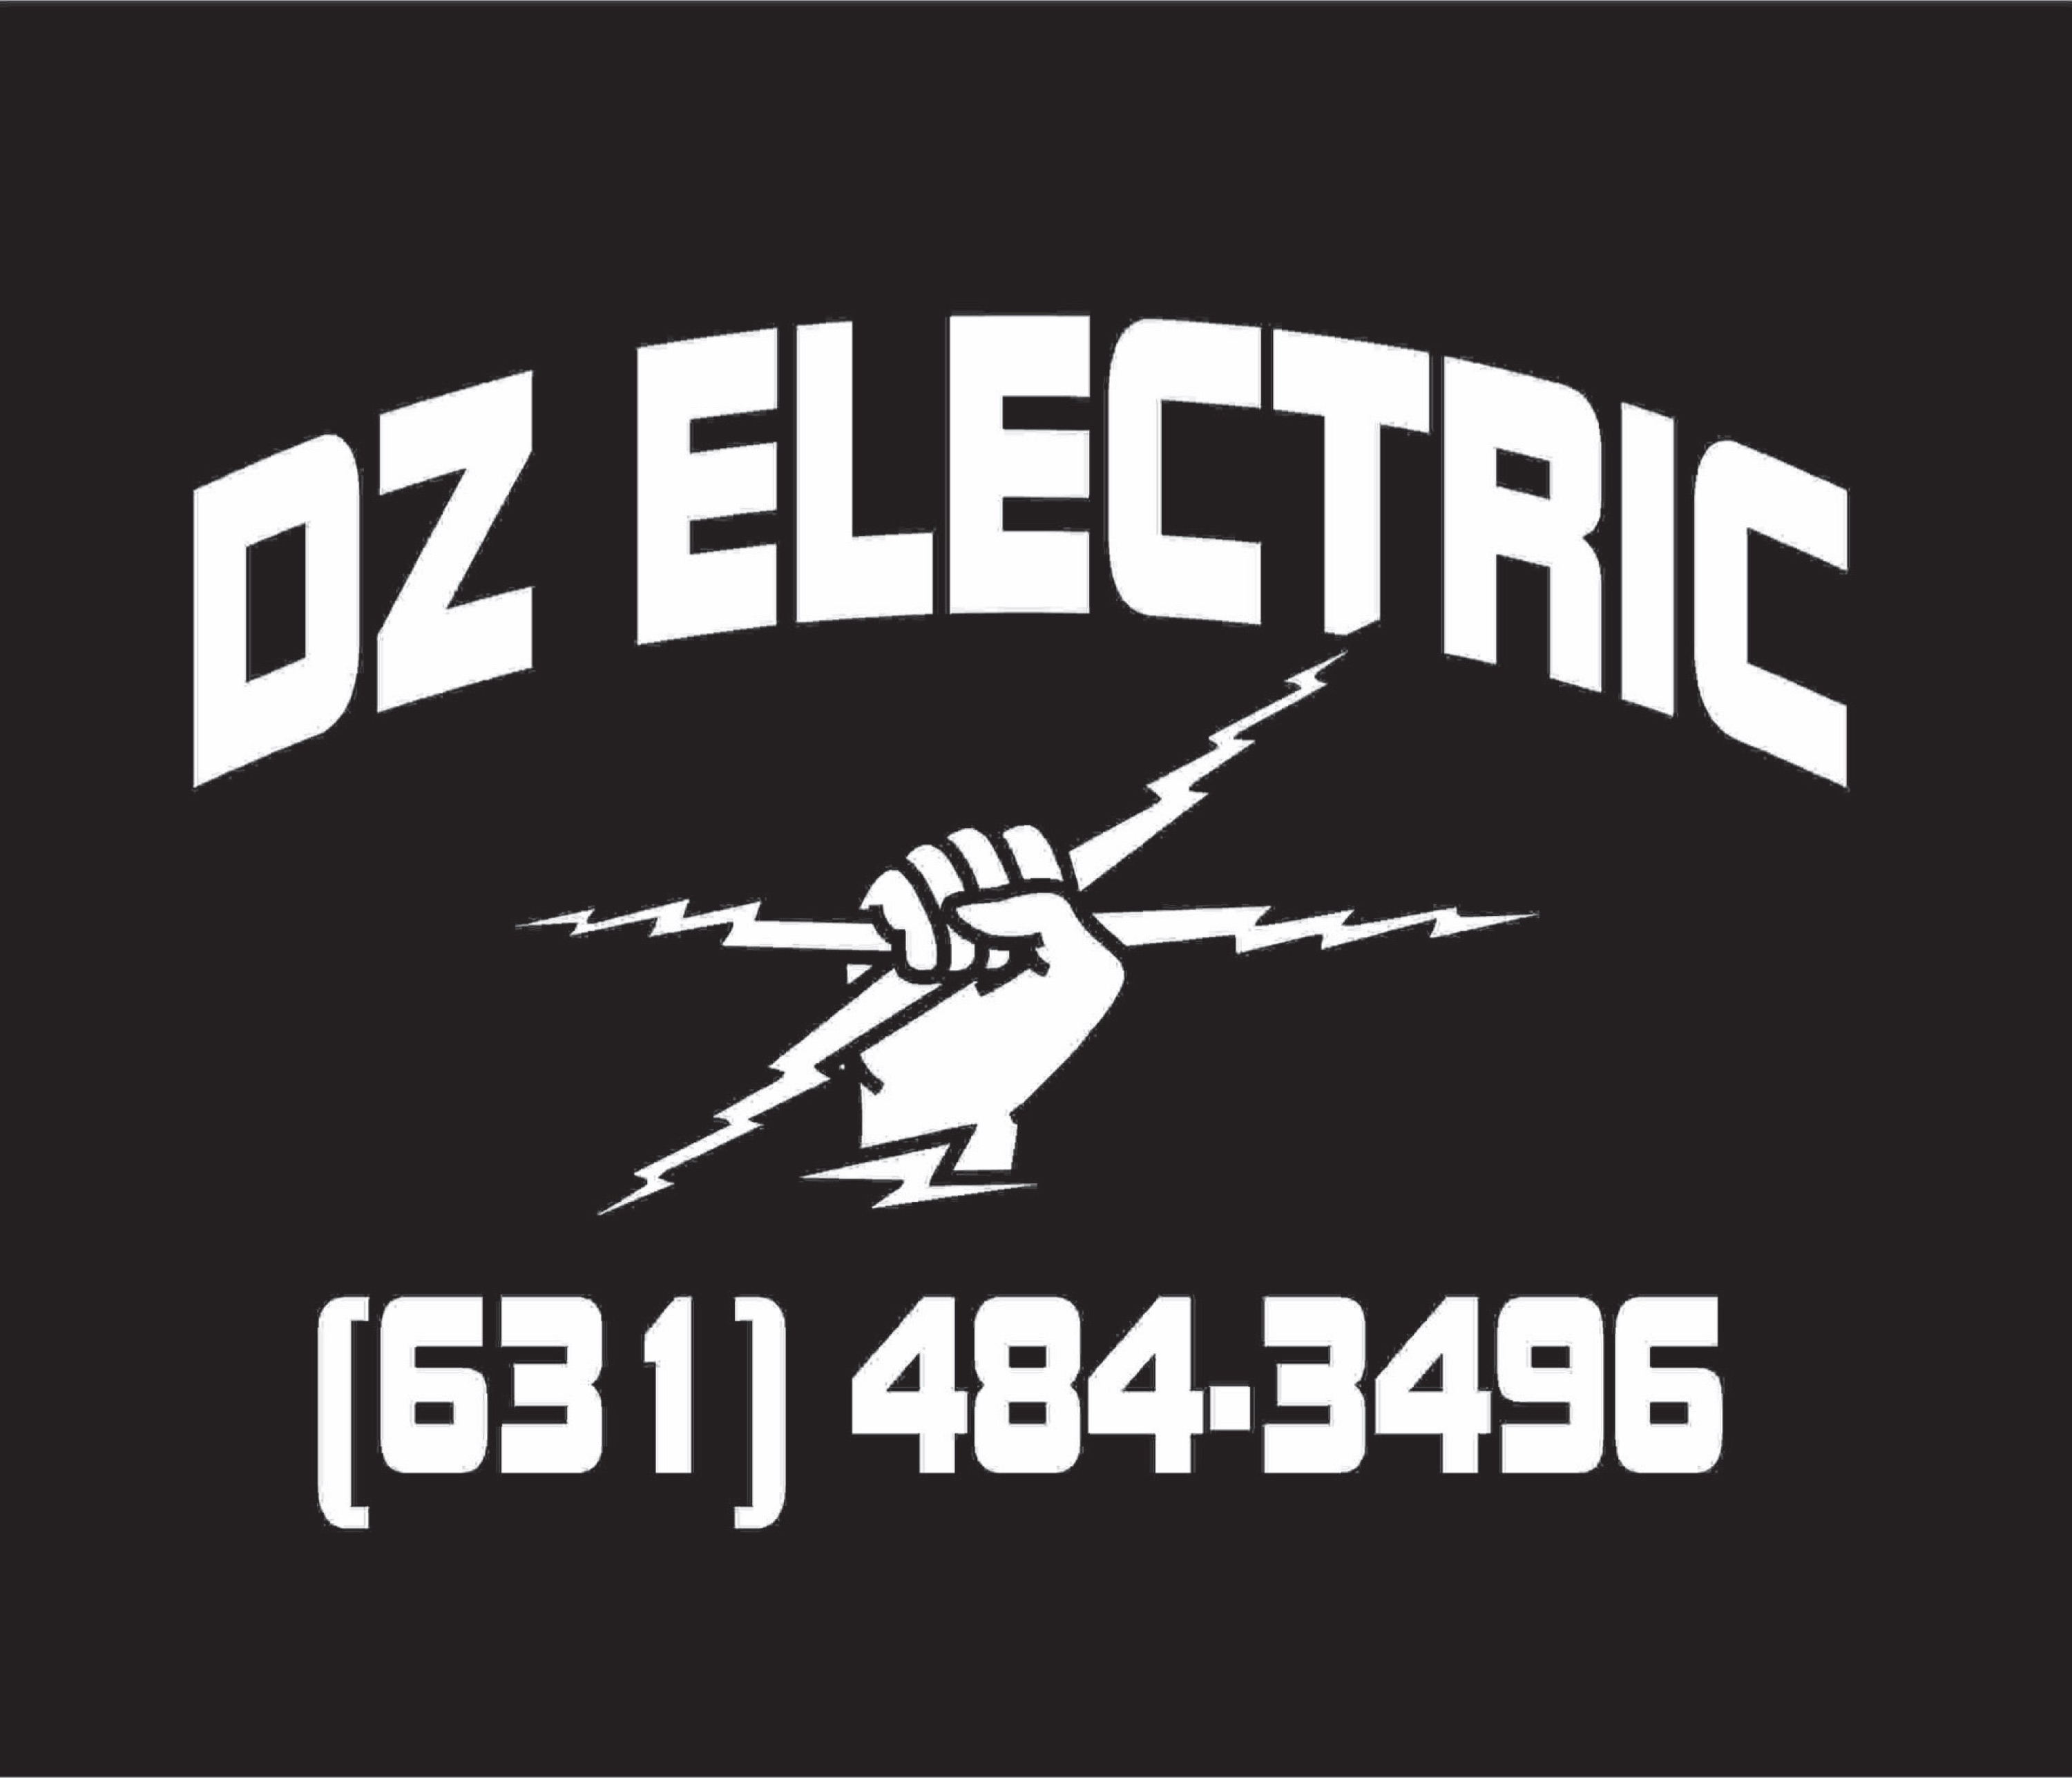 DZ Electrical Contracting Logo